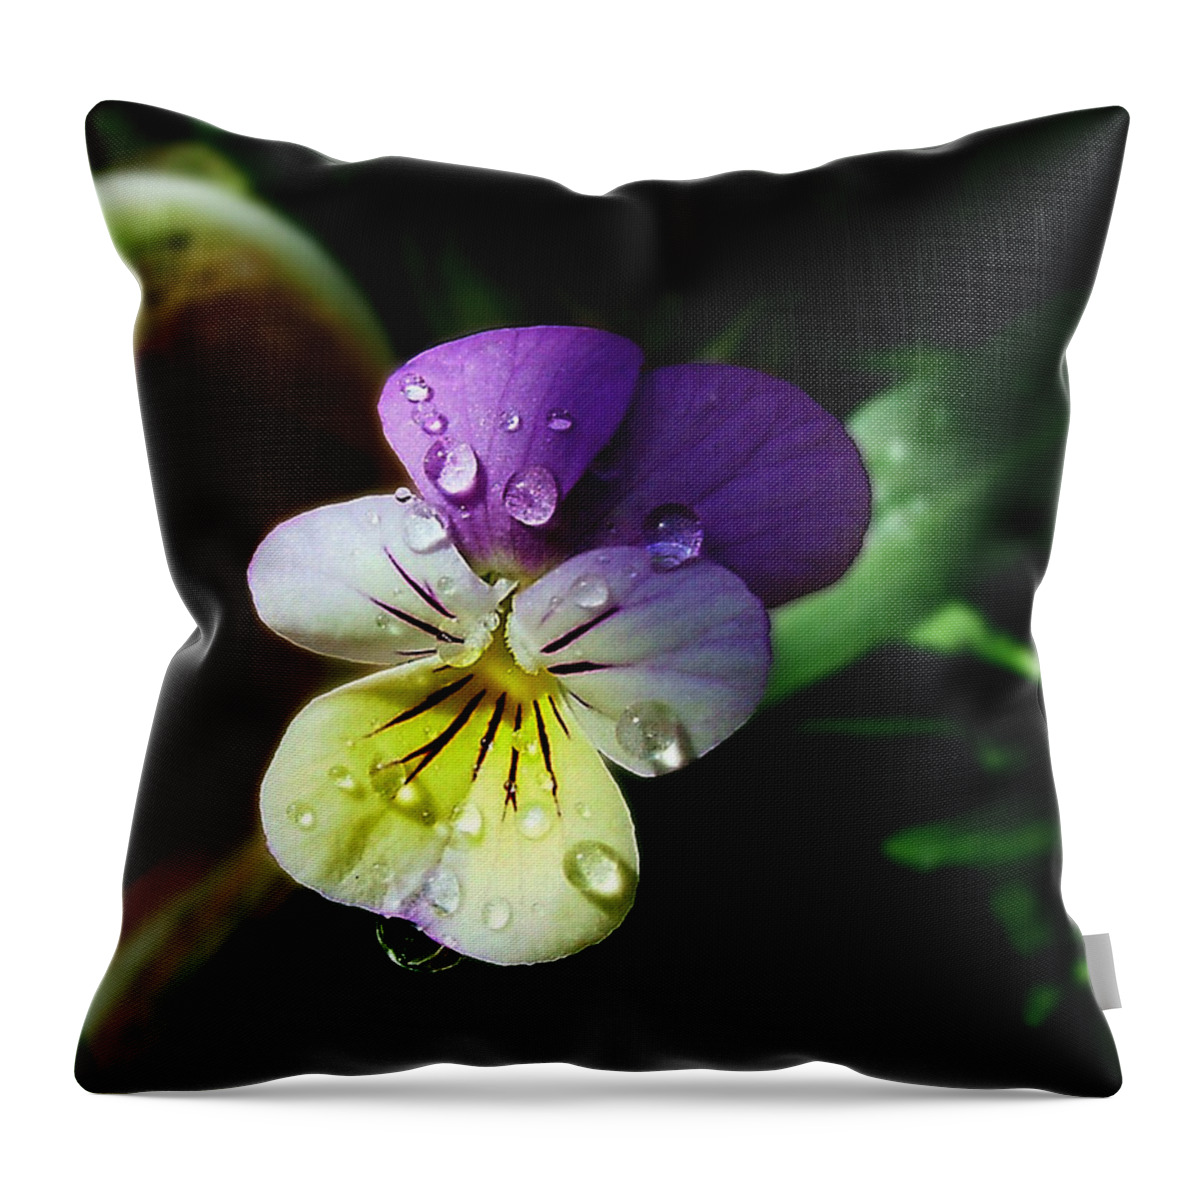 Flower Throw Pillow featuring the photograph Purple Pansy by Anthony Jones